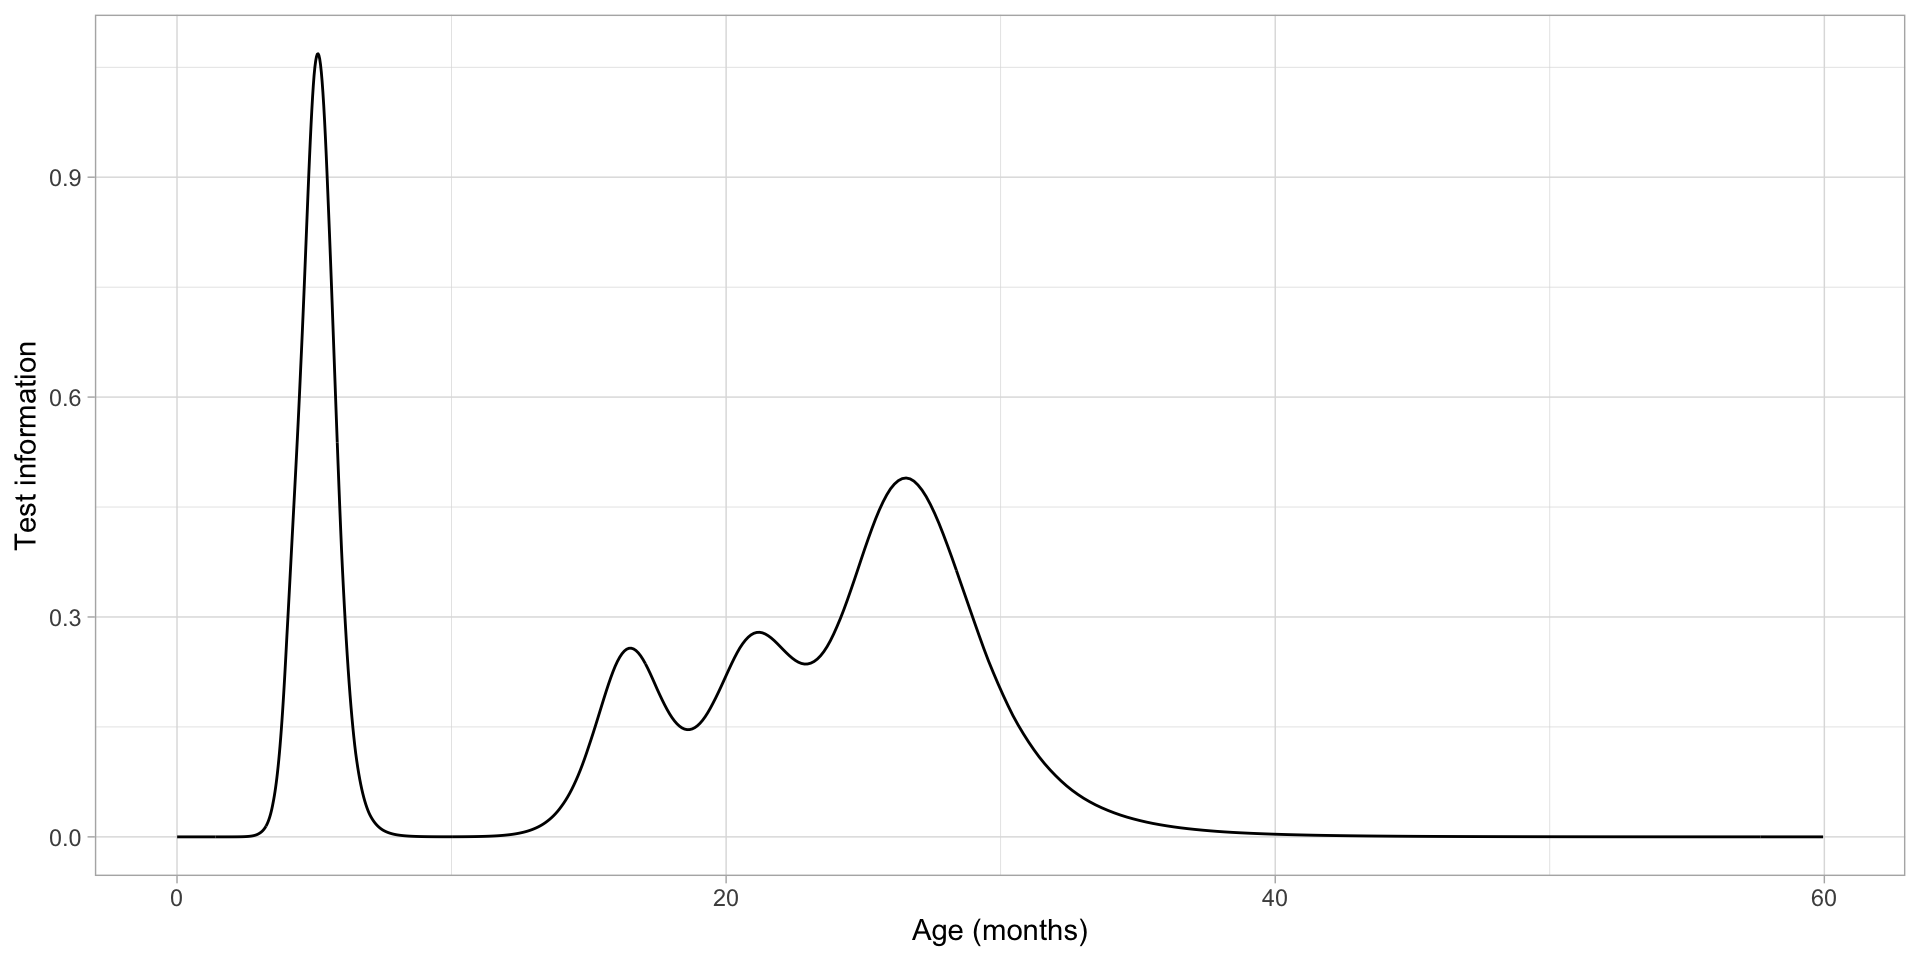 Test information by age for a set of 10 items not evenly distributed over the \(D\)-score scale.